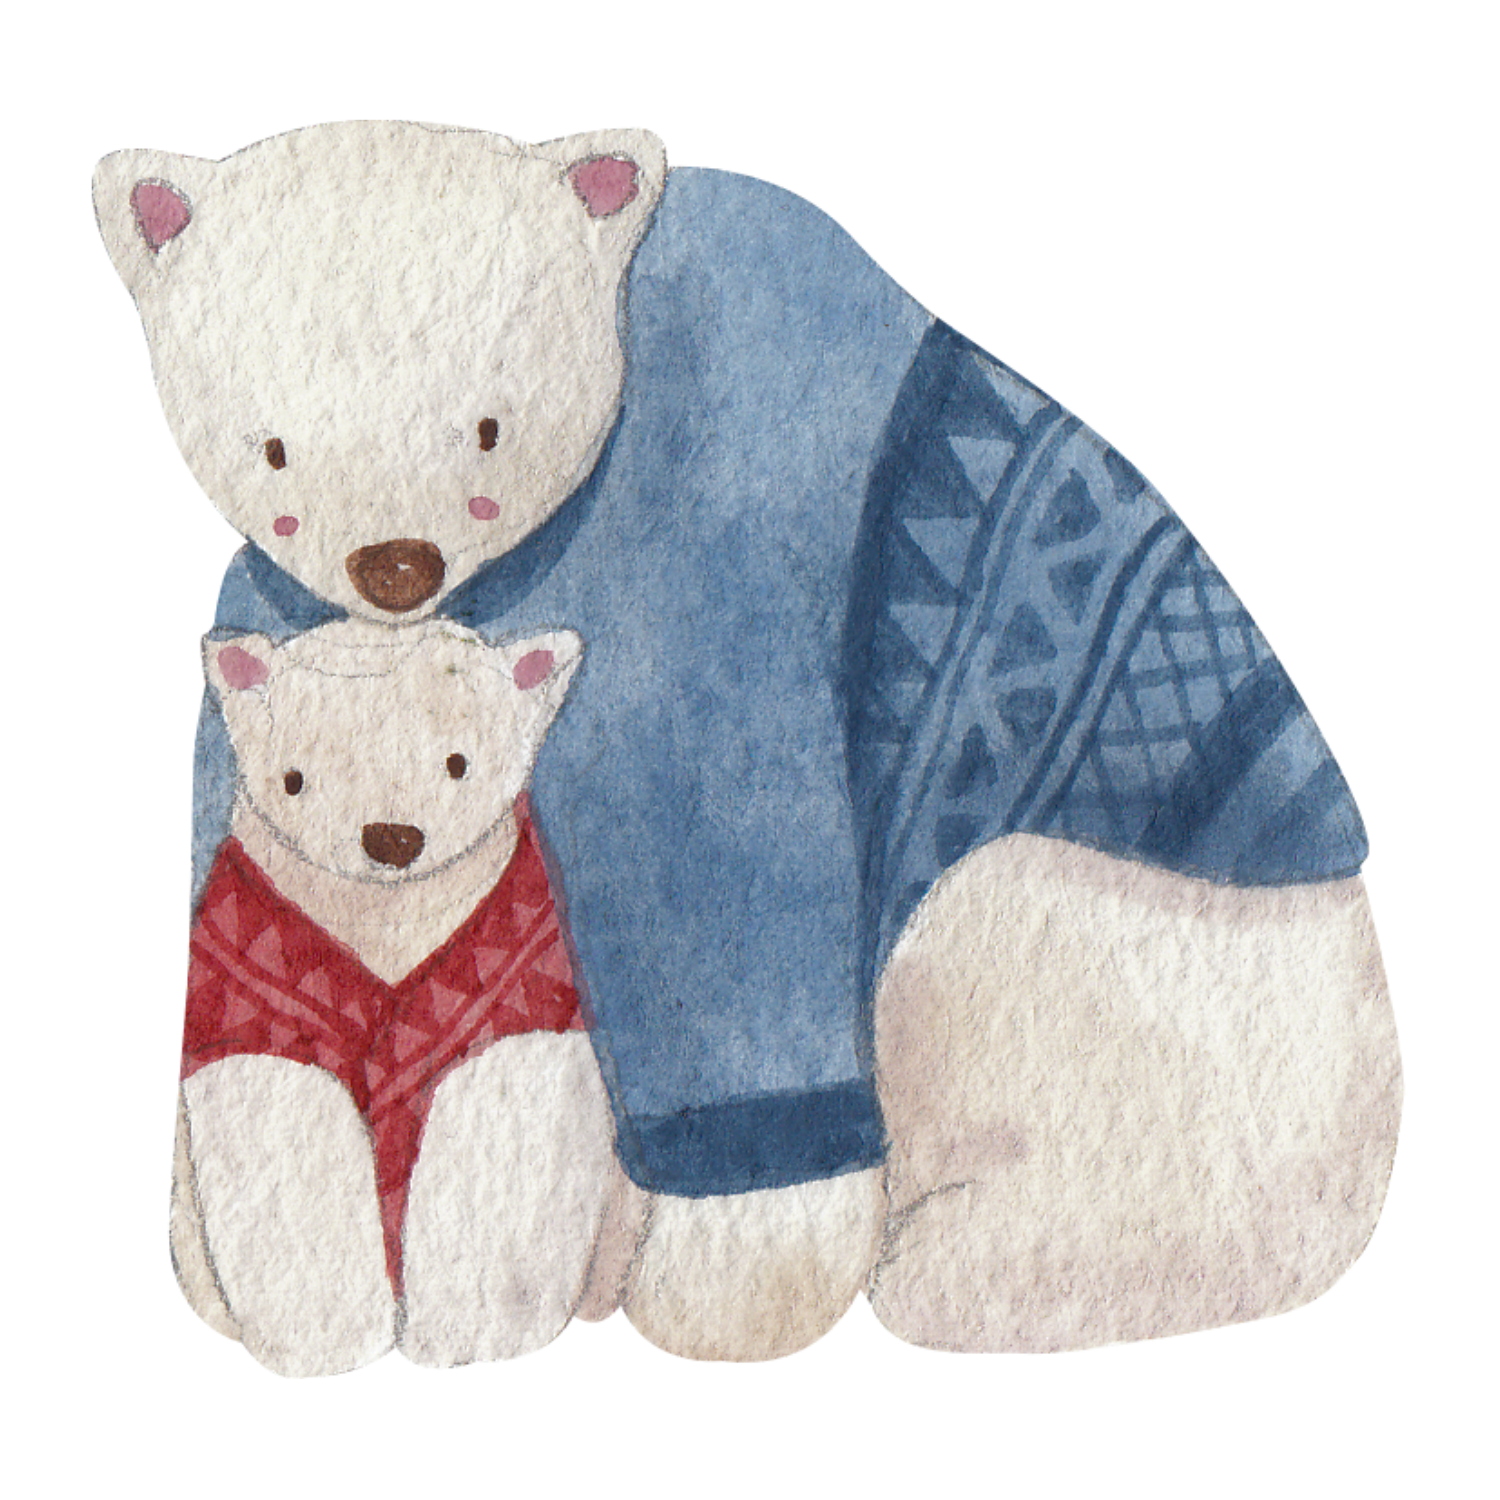 watercolour illustration of a big polar bear in a sweater cuddling a smaller one in a sweater